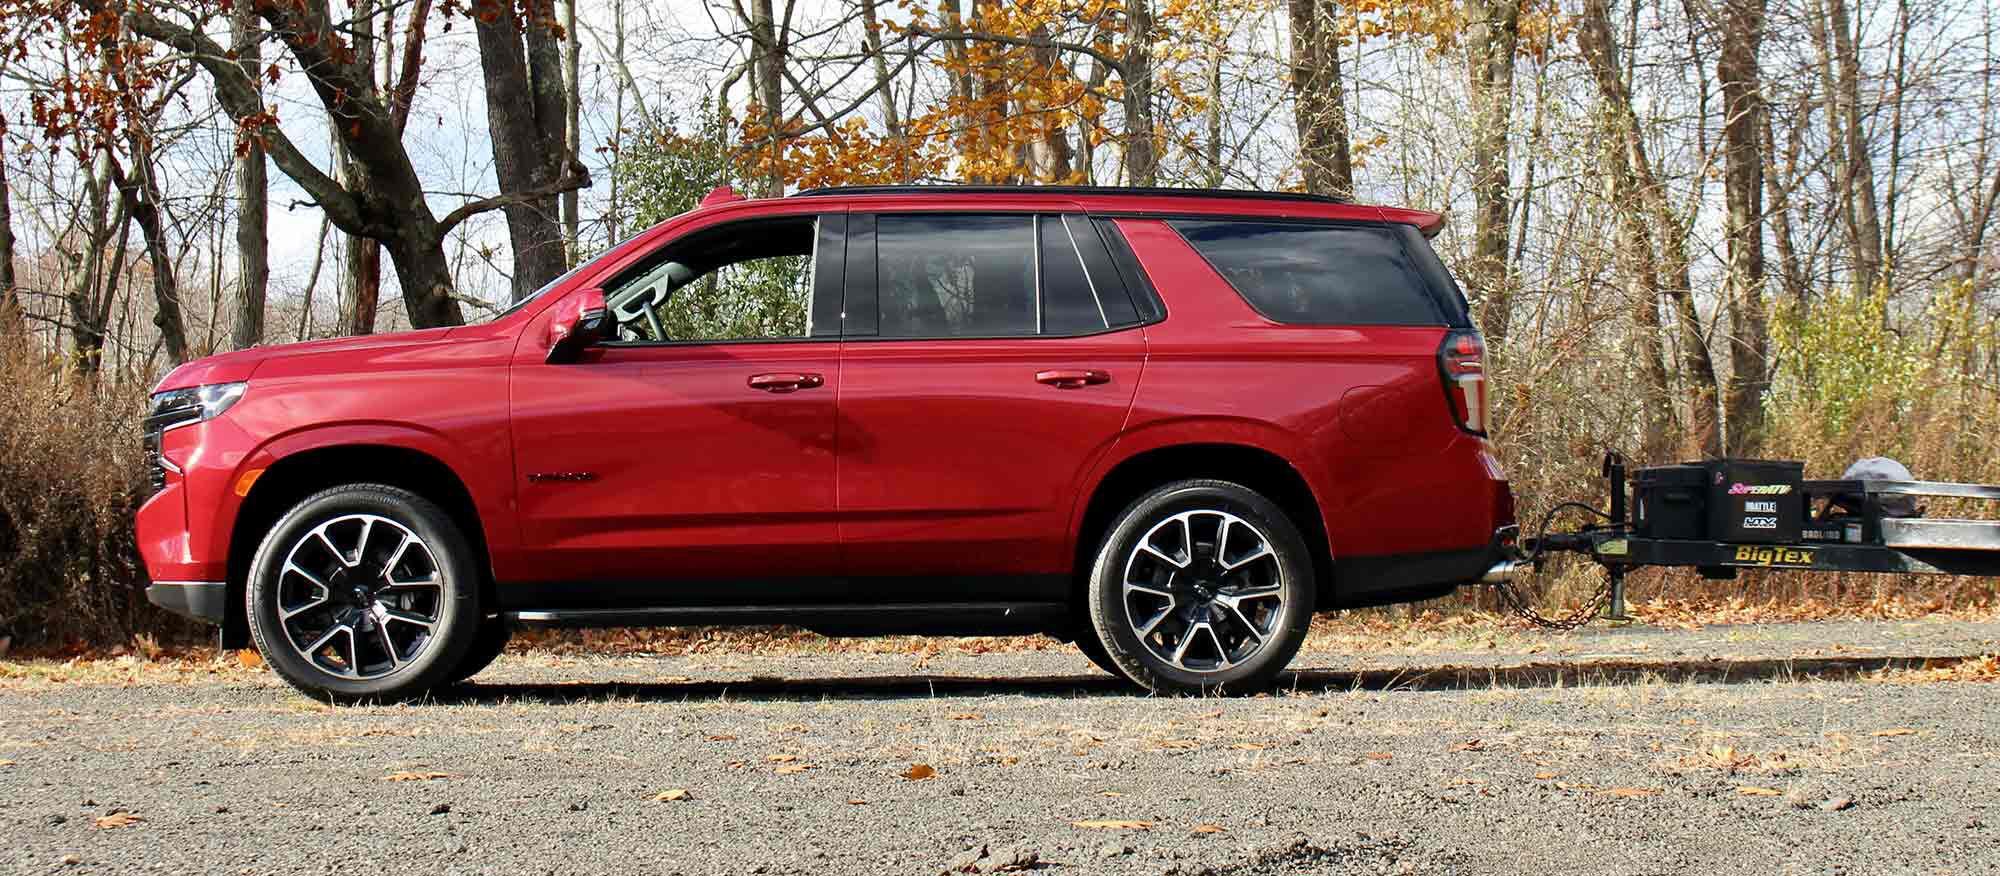 The RST’s 22-inch wheels wouldn’t be our choice for an SUV for towing use.